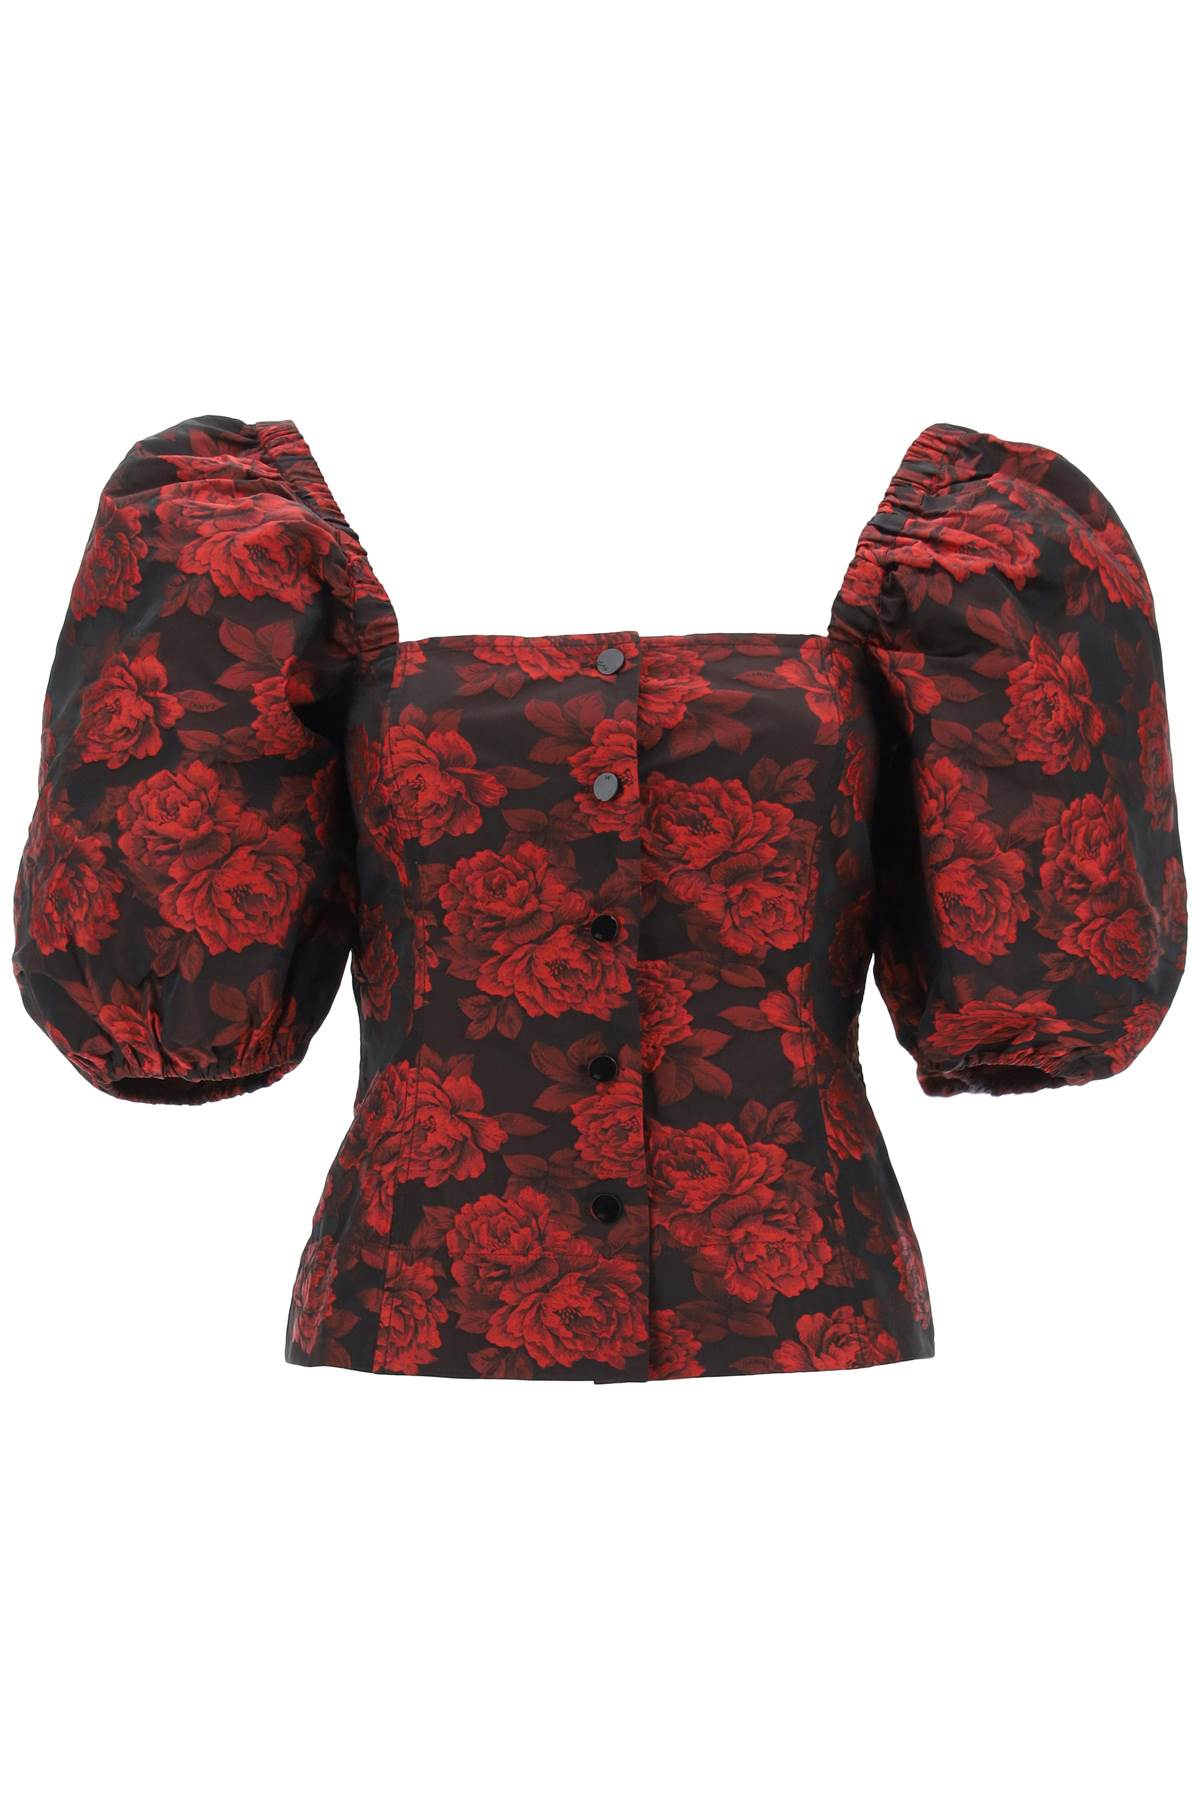 blouse in floral jacquard F8947 HIGH RISK RED